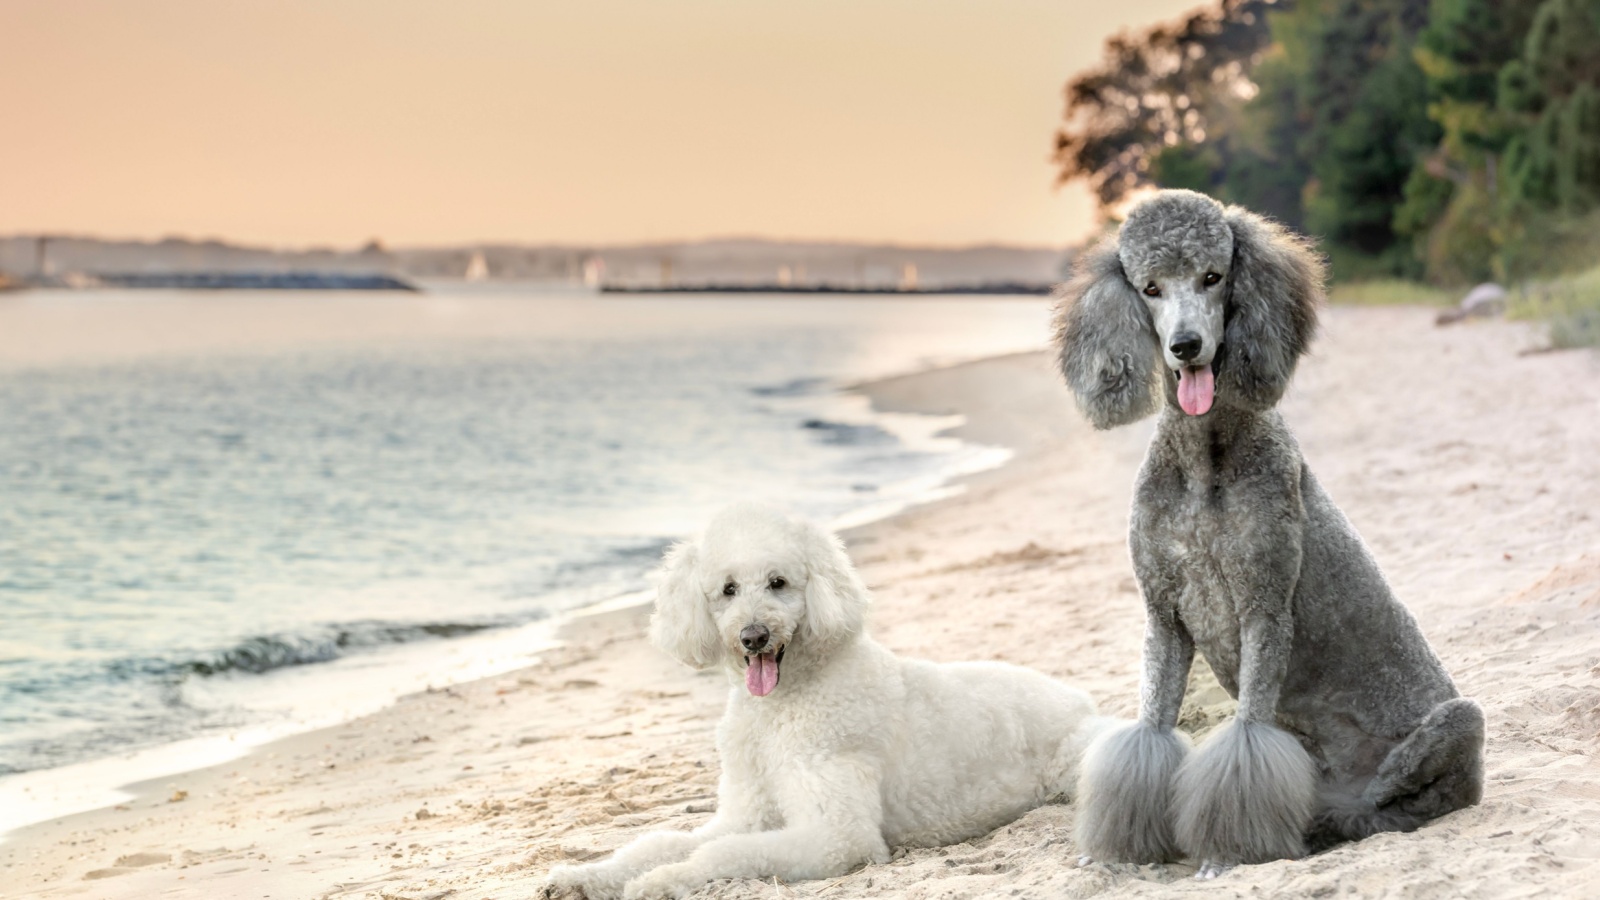 image credit: Danielle W Press/Shutterstock <p>Poodles come in standard, miniature, and toy, each fitting different lifestyles and living spaces. Whether you need a robust companion for outdoor adventures or a petite lap dog, there’s a poodle size for that.</p>